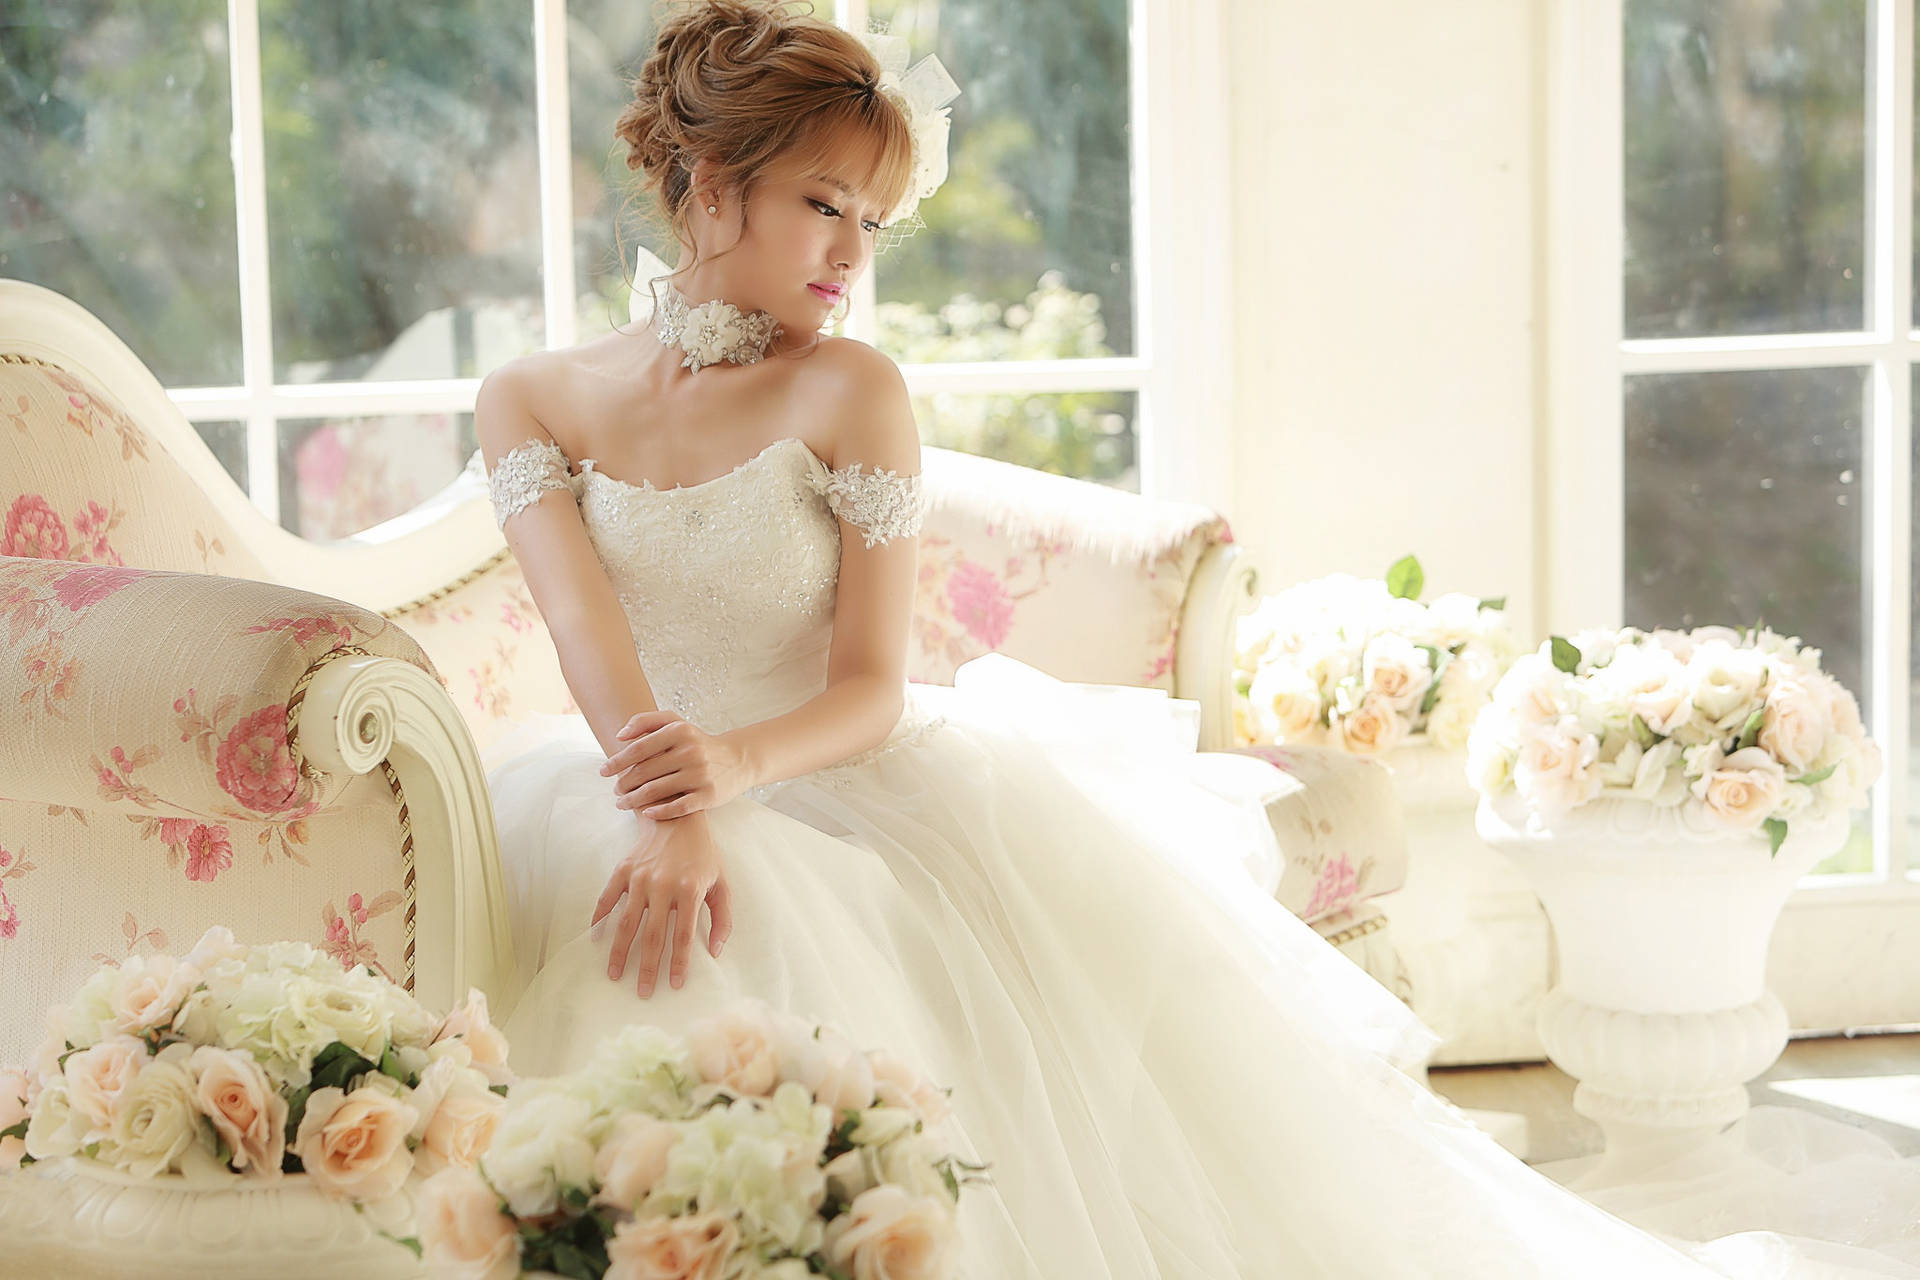 Bride 2048X1365 Wallpaper and Background Image